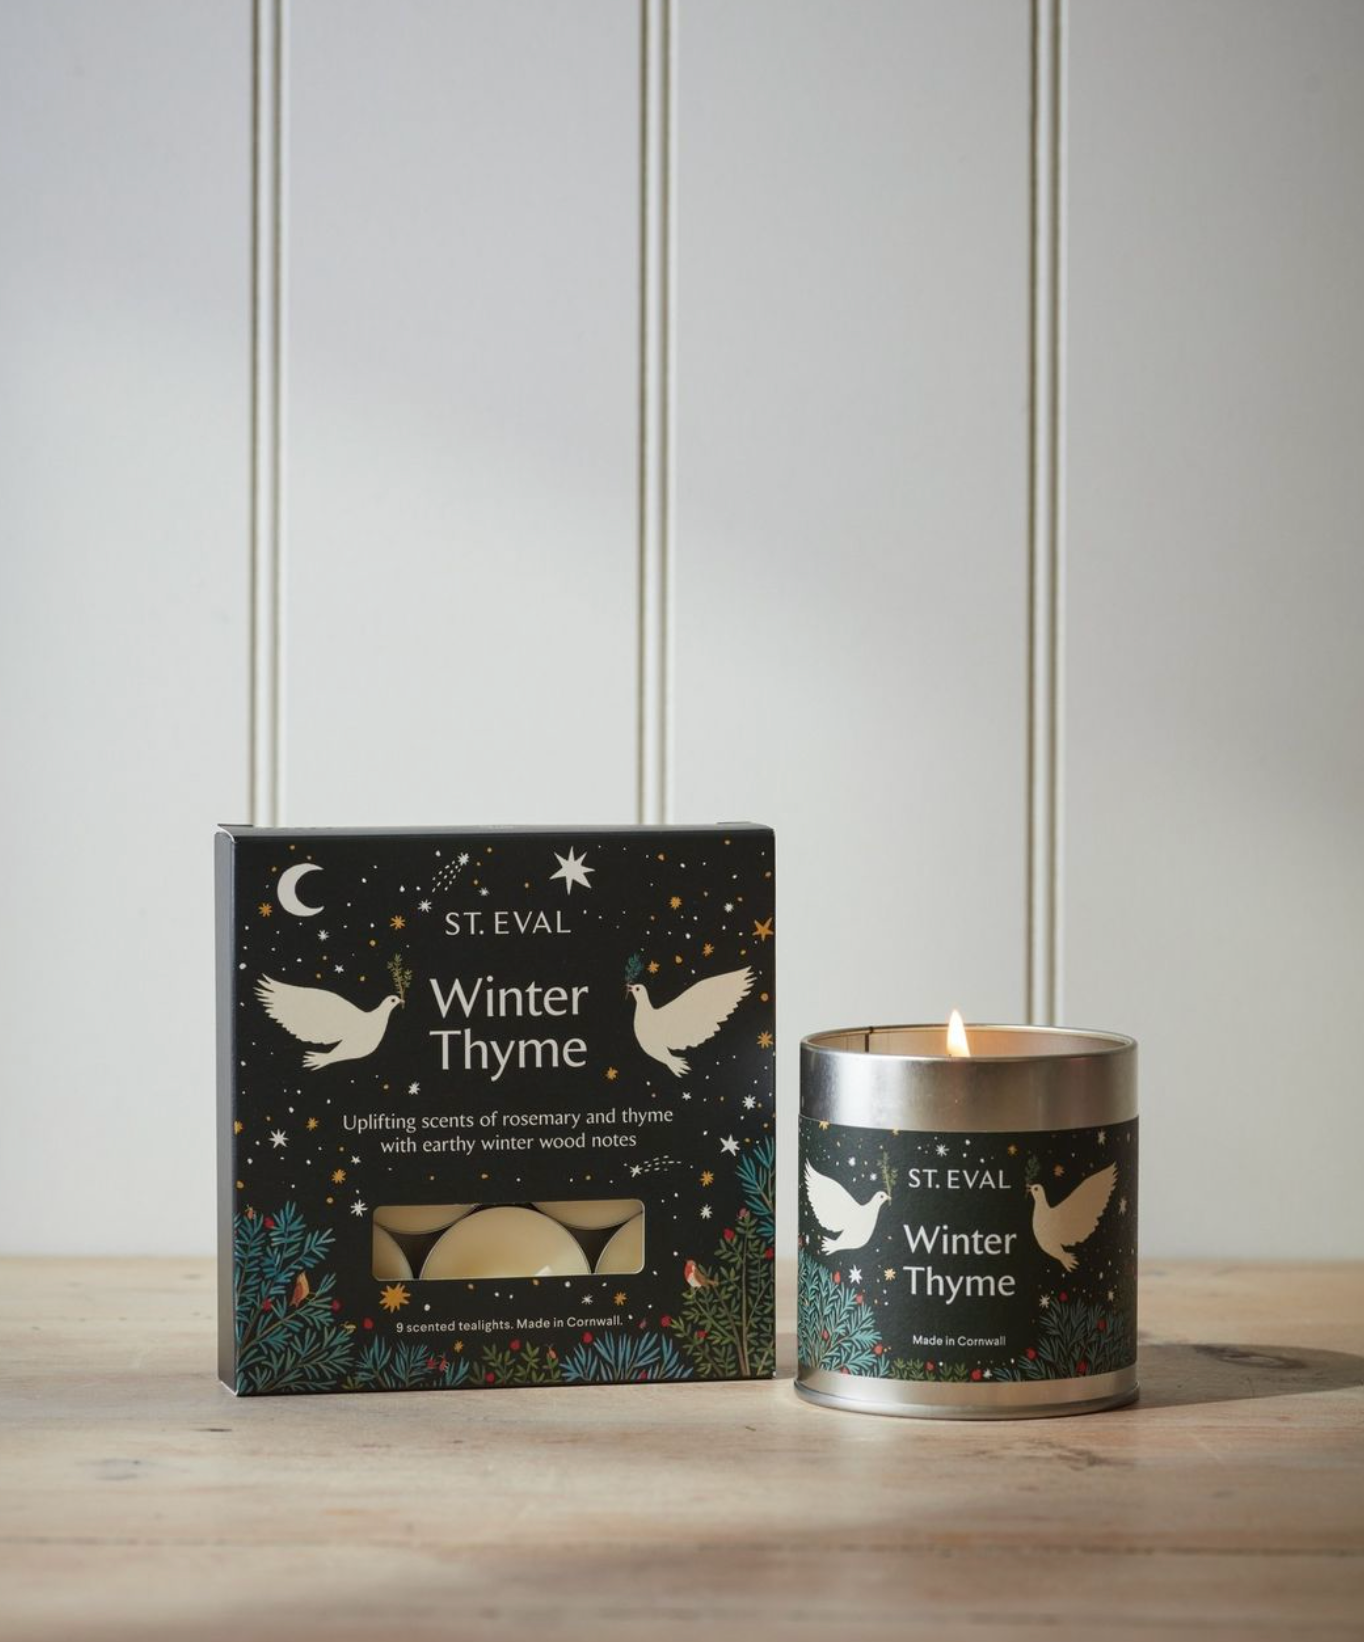 St Eval Winter Thyme Scented Tin Candle